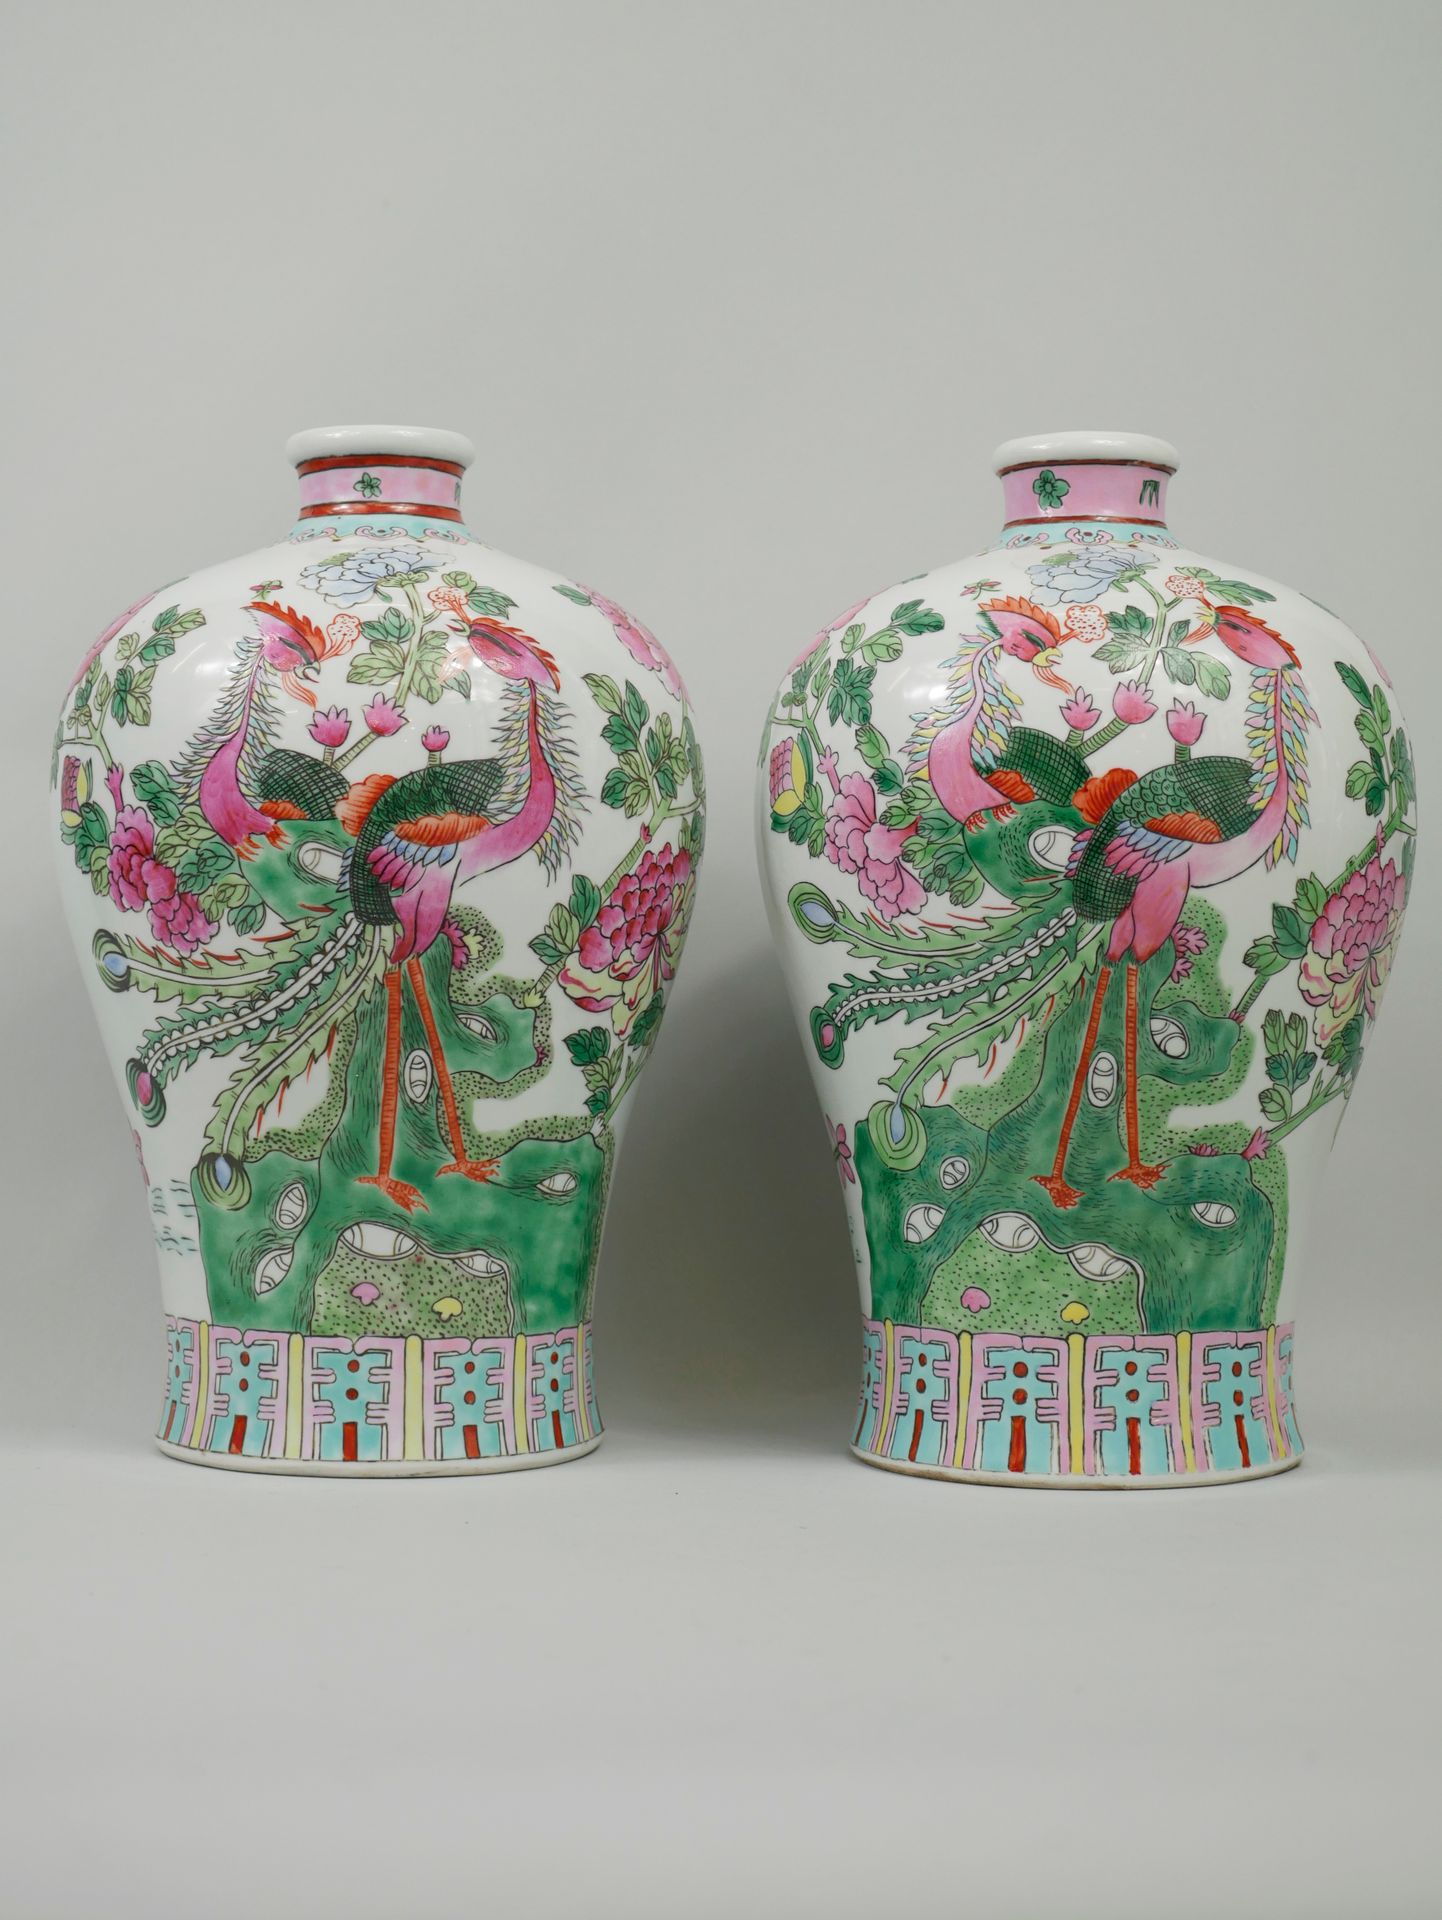 Null CHINA, 20th century. Two vases decorated with birds and flowers. Apocryphal&hellip;